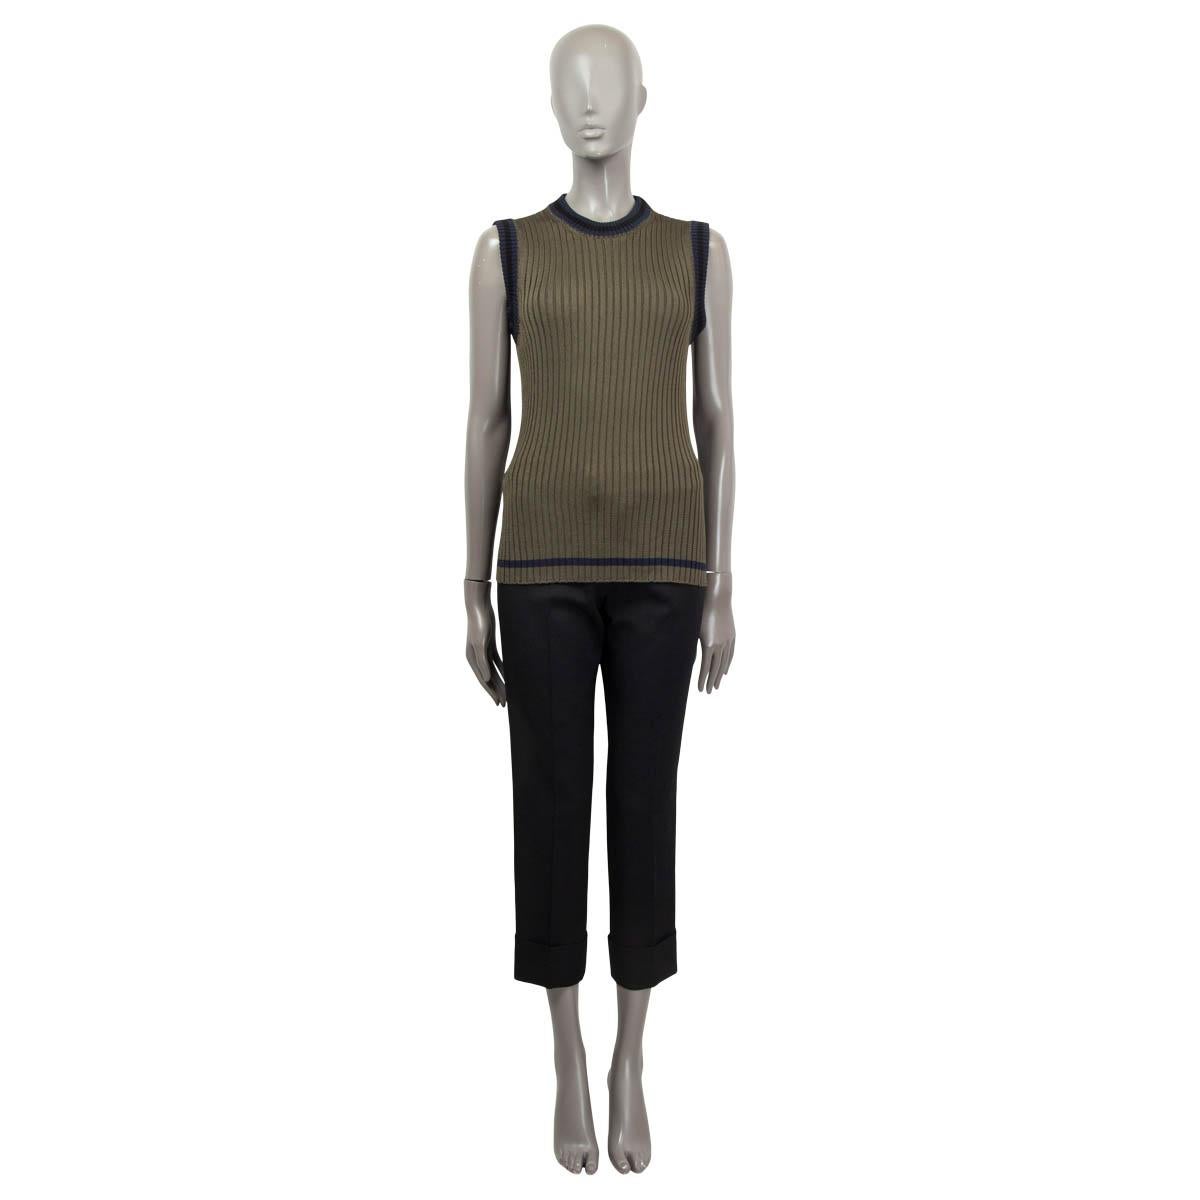 100% authentic Prada sleeveless knit top in olive green, navy and black viscose (100%). Features a contrast round collar. Has been worn and is in excellent condition.

Measurements
Tag Size	42
Size	M
Shoulder Width	39cm (15.2in)
Bust From	96cm